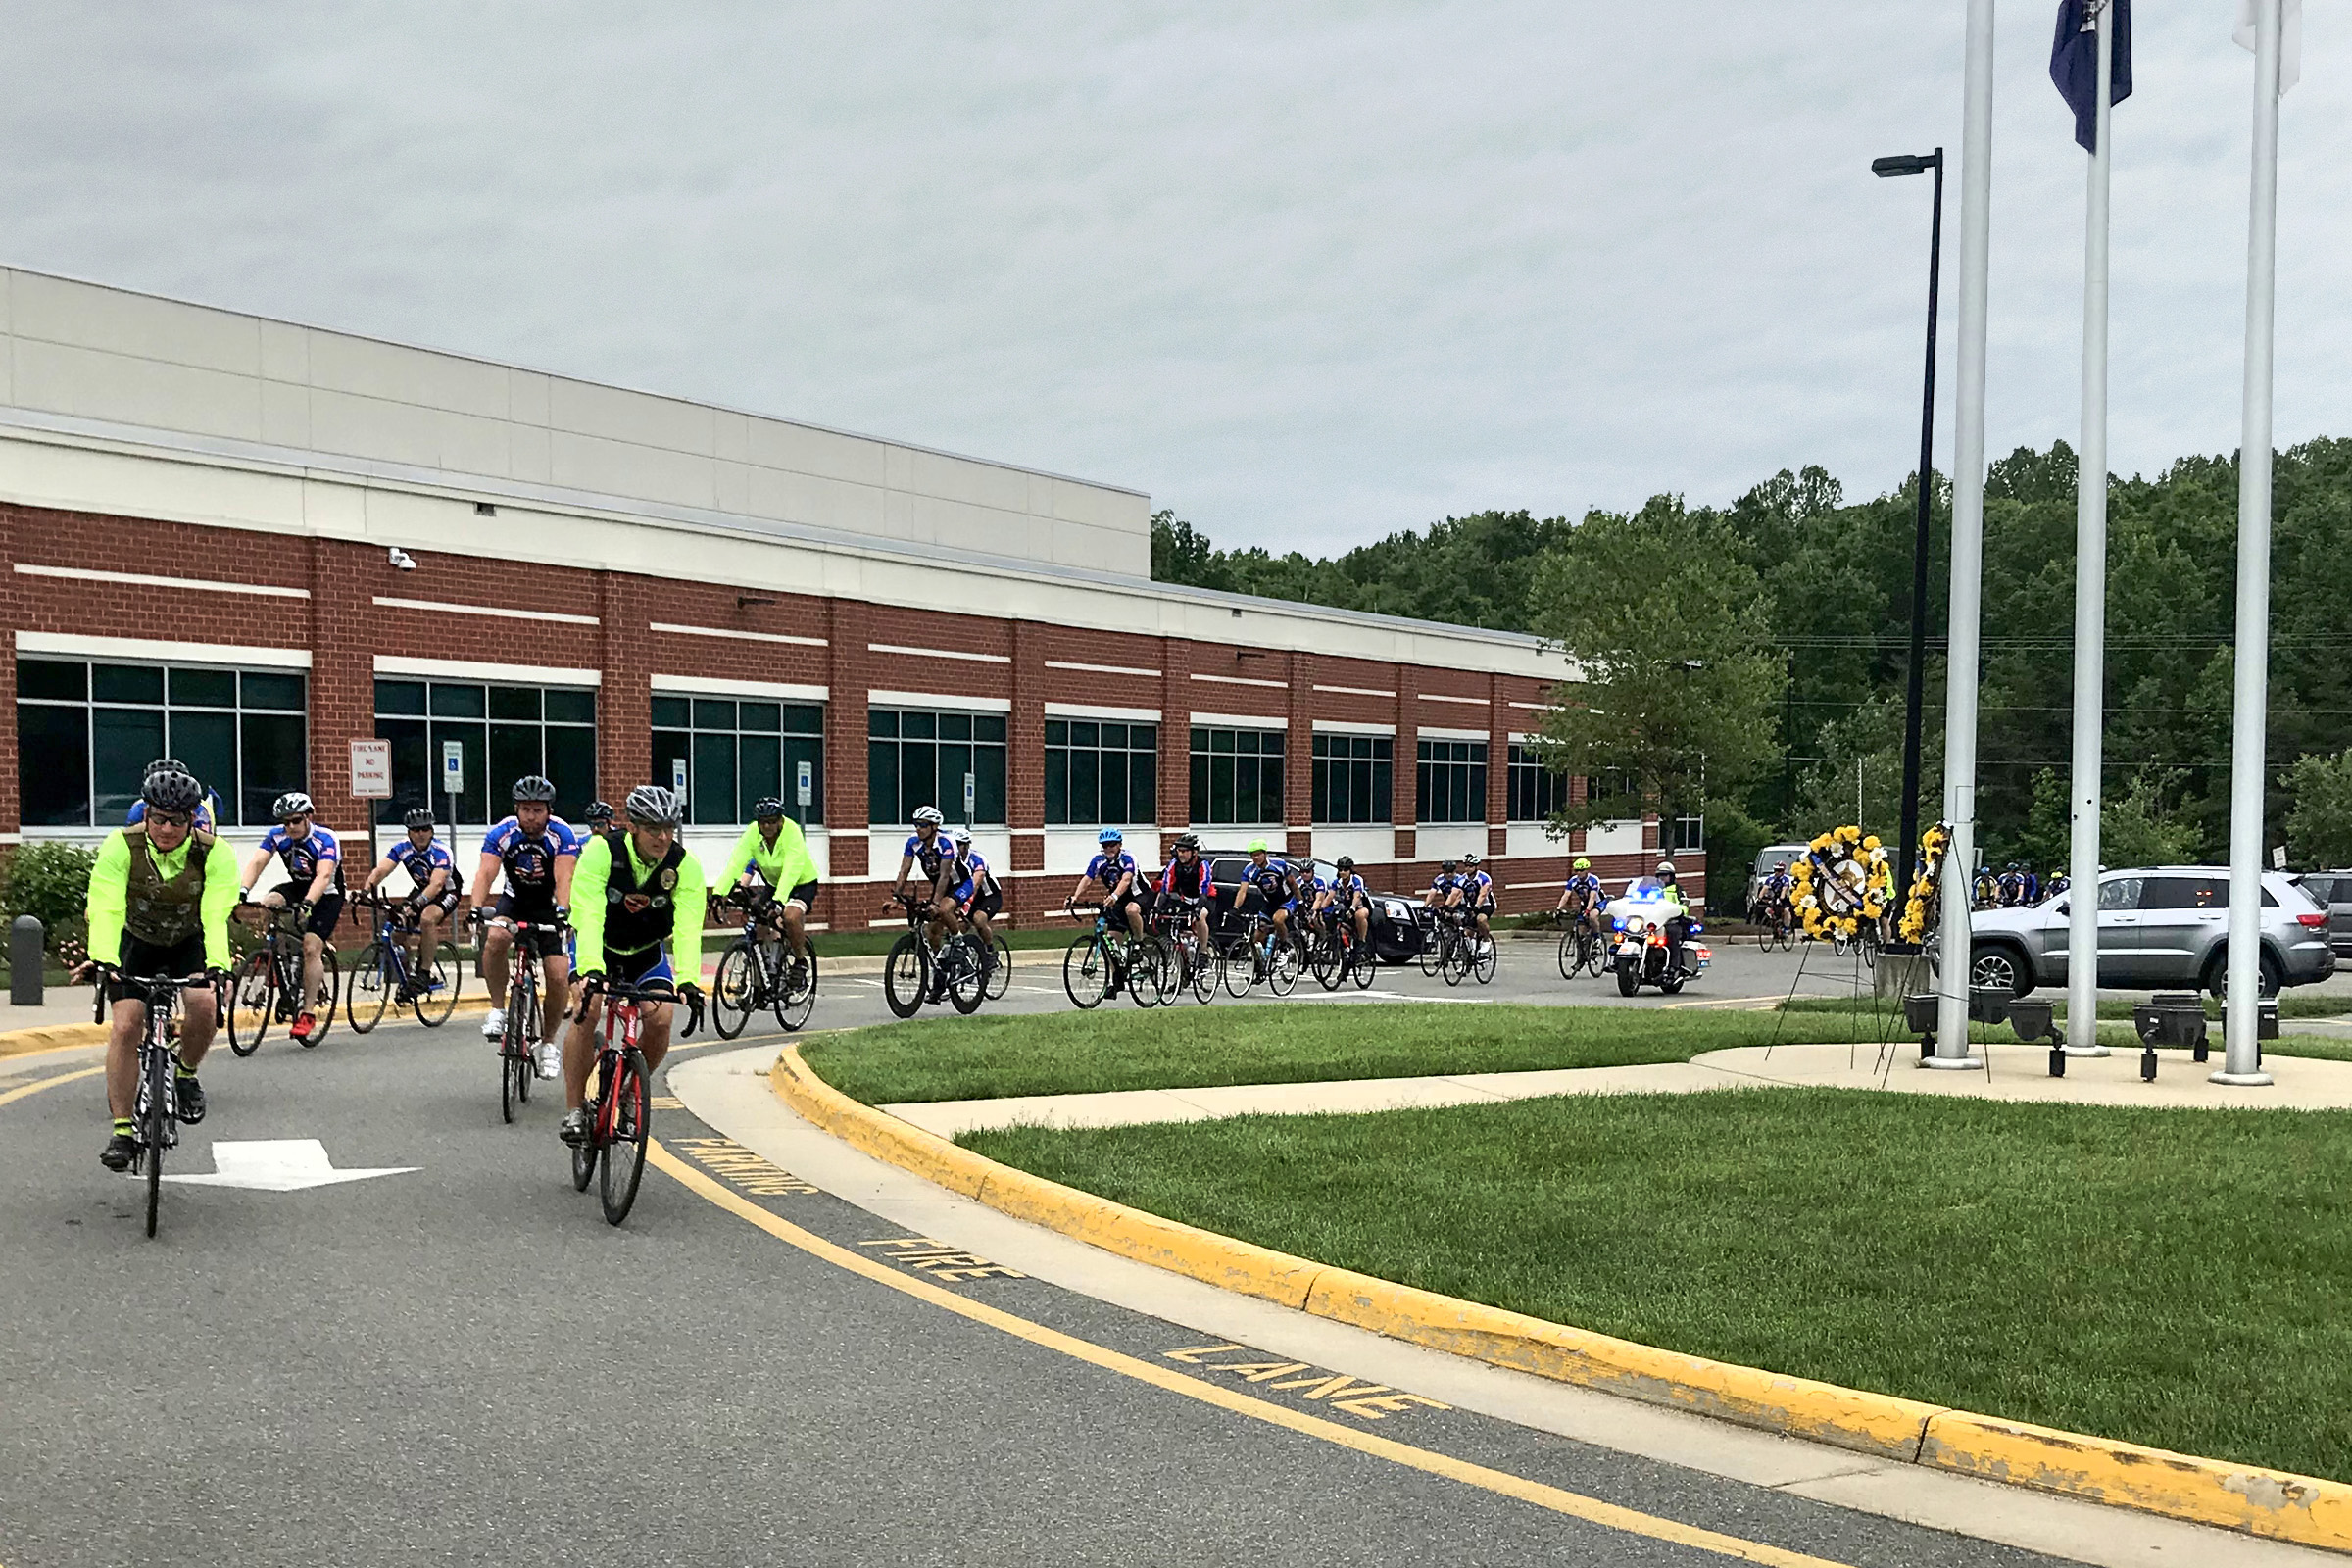 CN Public Safety's Dan Walker participated in the 2019 LEU Road to Hope.